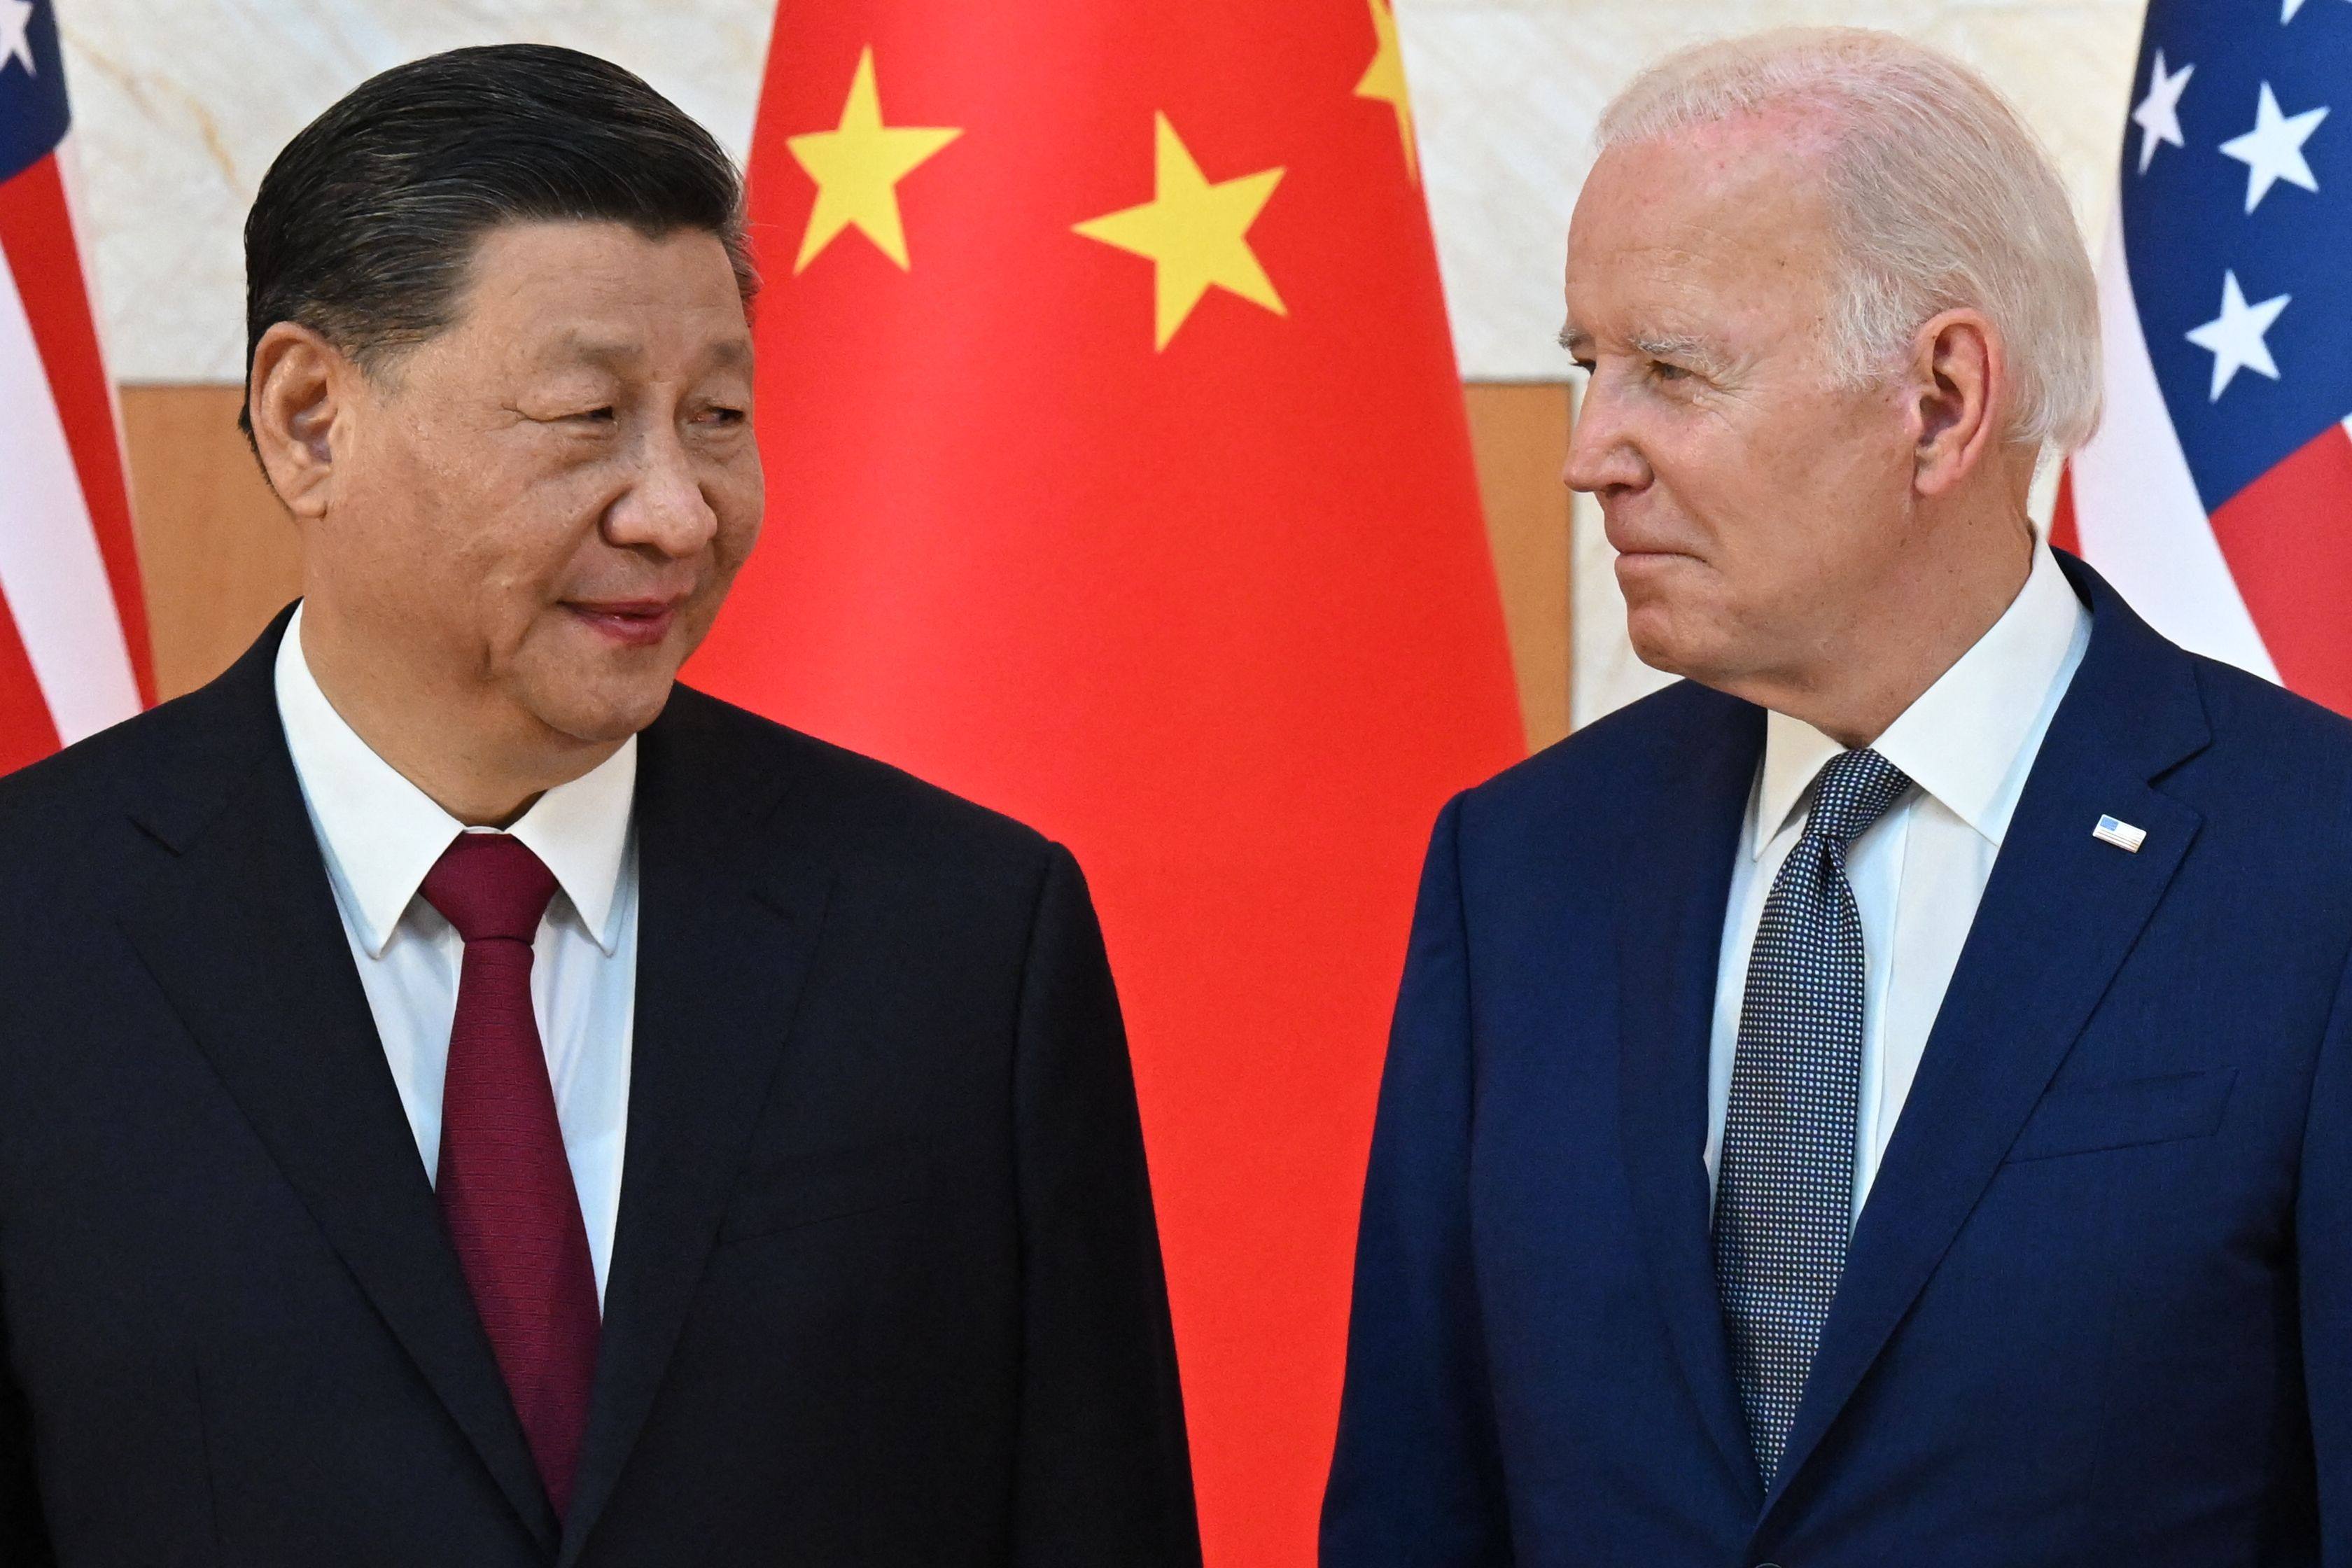 Xi Jinping and Joe Biden last met in Bali nearly a year ago. Anticipation is growing for a summit next month in San Francisco. Photo: AFP